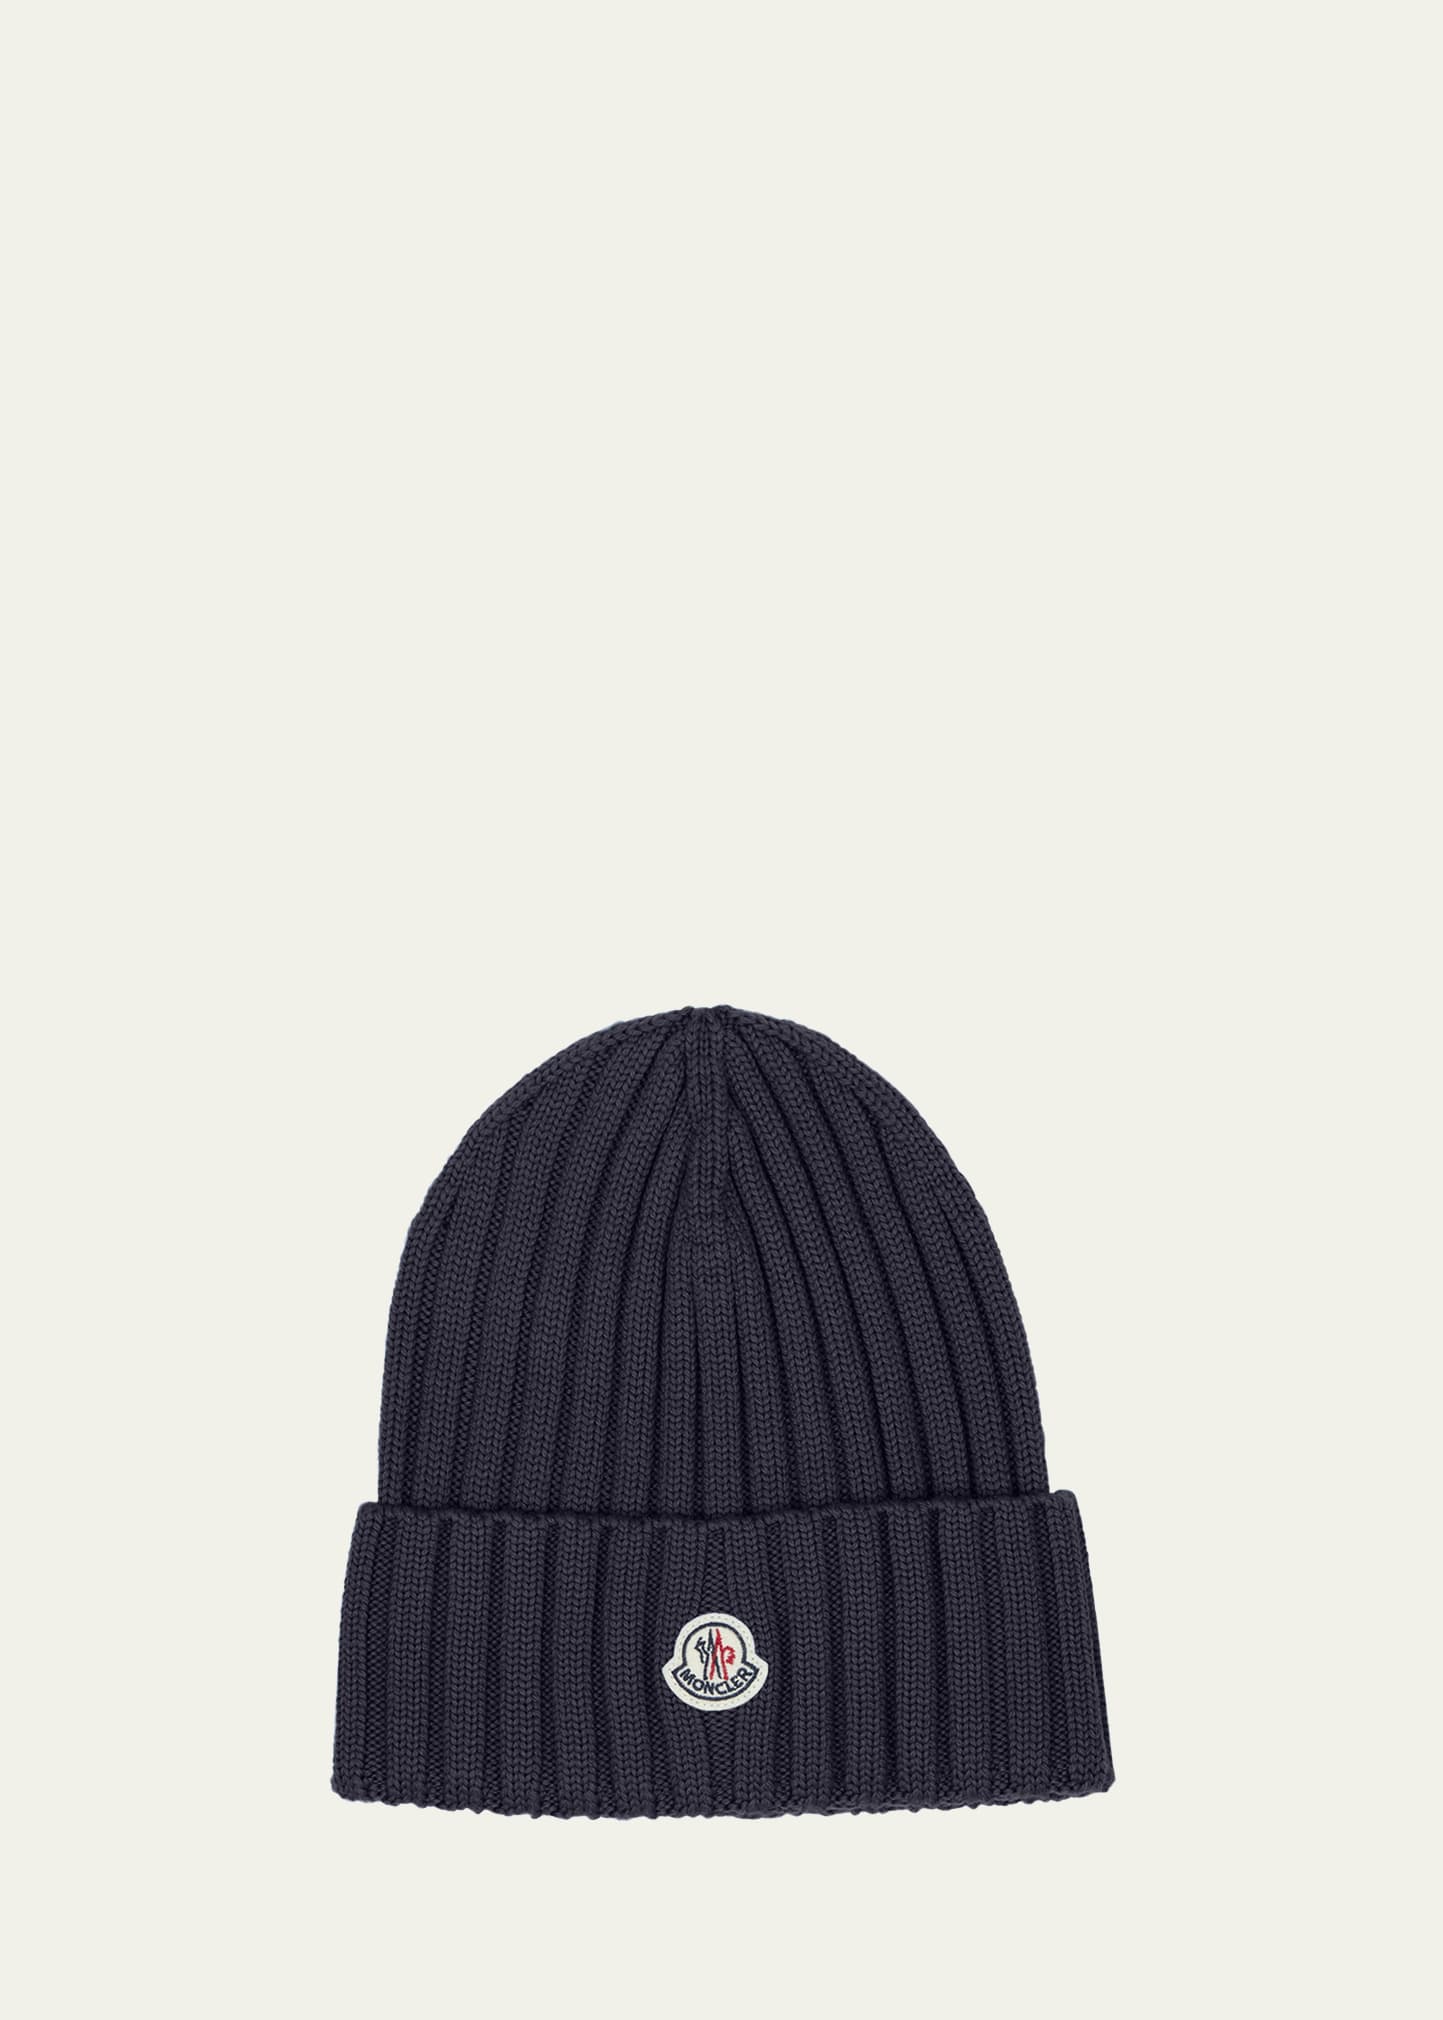 Away competition Uncle or Mister moncler knit hat Pornography squat passion